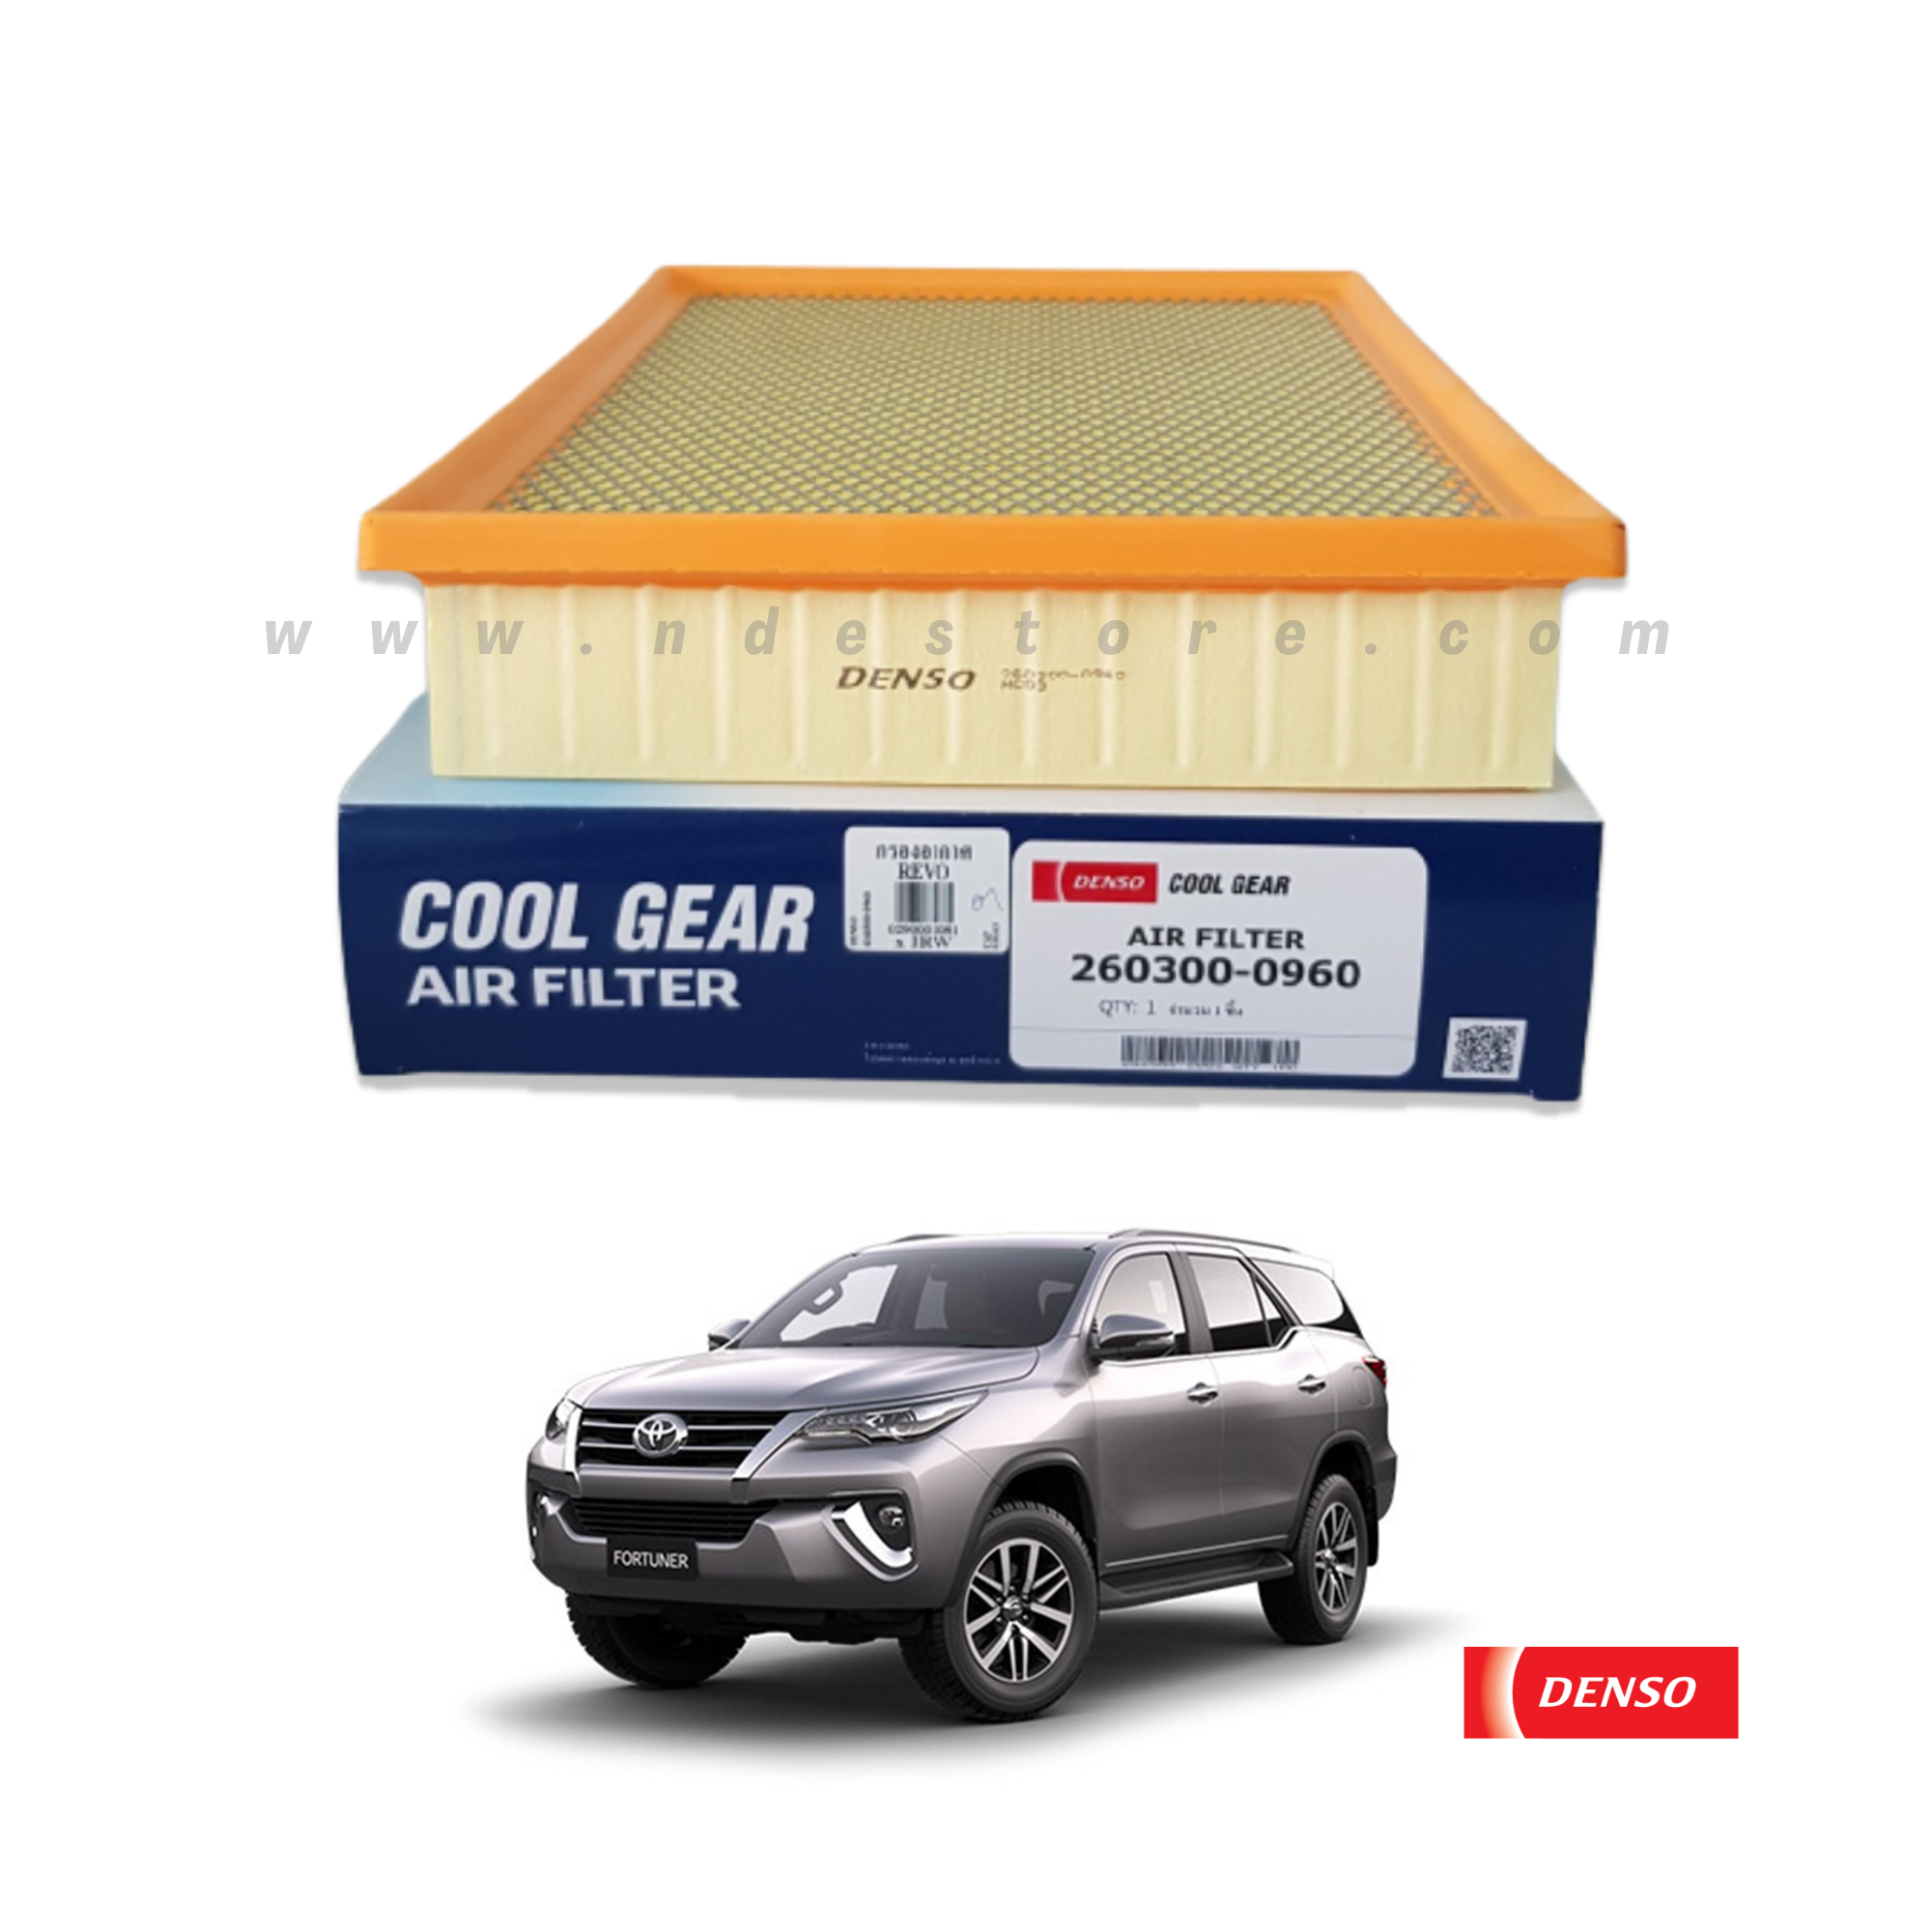 AIR FILTER DENSO FOR TOYOTA FORTUNER